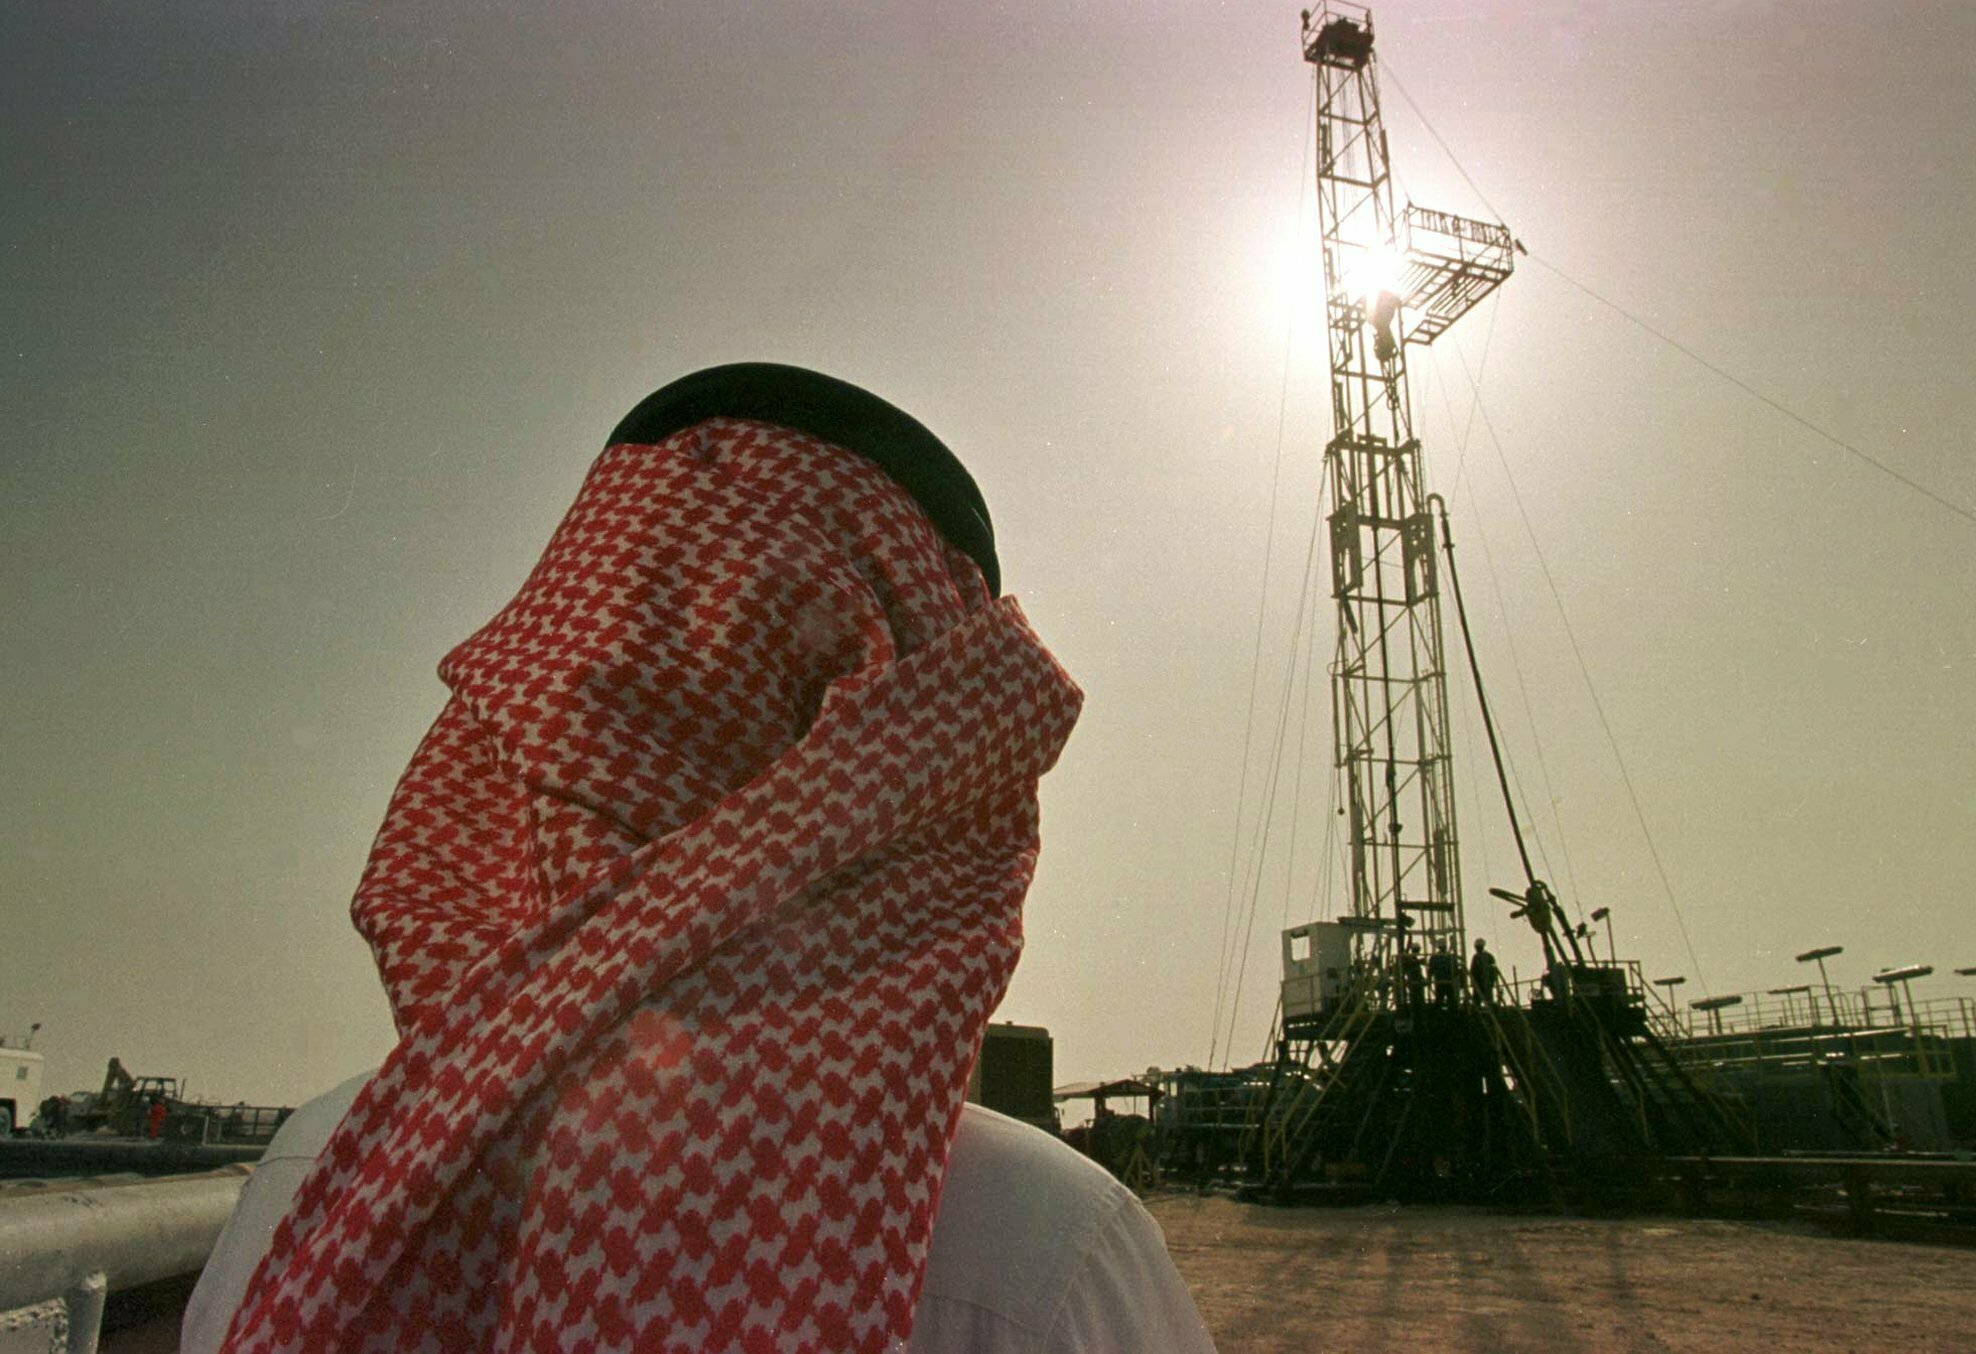 FILE - In this Feb. 26, 1997 file photo, Khaled al-Otaiby, an official of the Saudi oil company Aramco, watches progress at a rig at the al-Howta oil field near Howta, Saudi Arabia. According to an assessment published Monday, April 1, 2019, by Moody's Investors Services, the net profits of Saudi Aramco reached $111 billion last year. (AP Photo/John Moore, File)